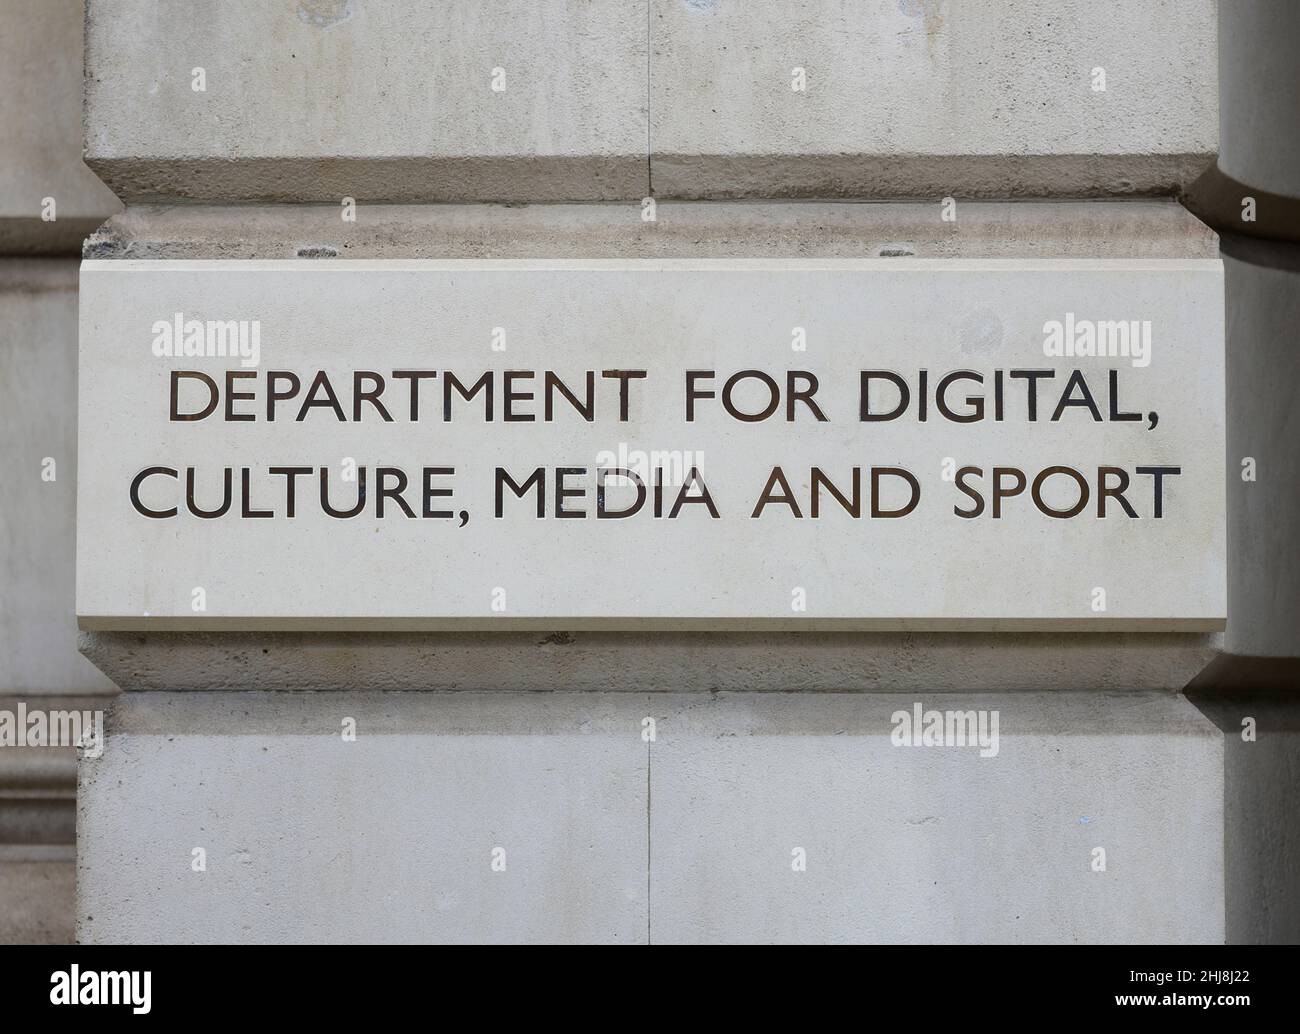 London, UK. 27 January 2022. Department for Digital, Culture, Media and Sport sign in Whitehall Stock Photo